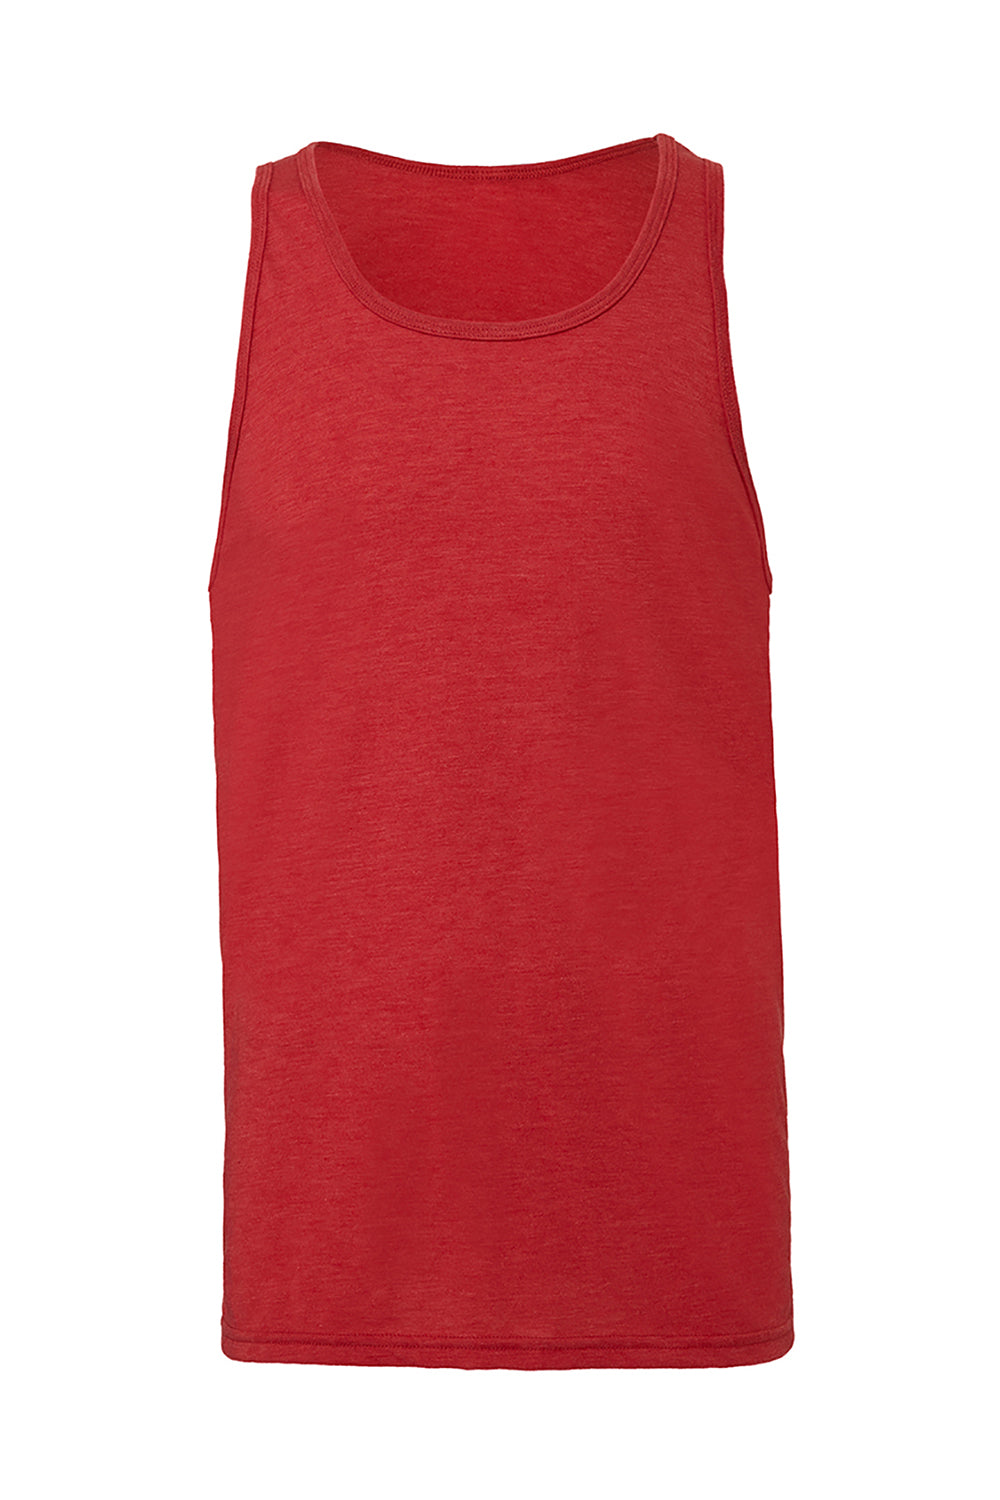 Bella + Canvas BC3480/3480 Mens Jersey Tank Top Red Triblend Flat Front